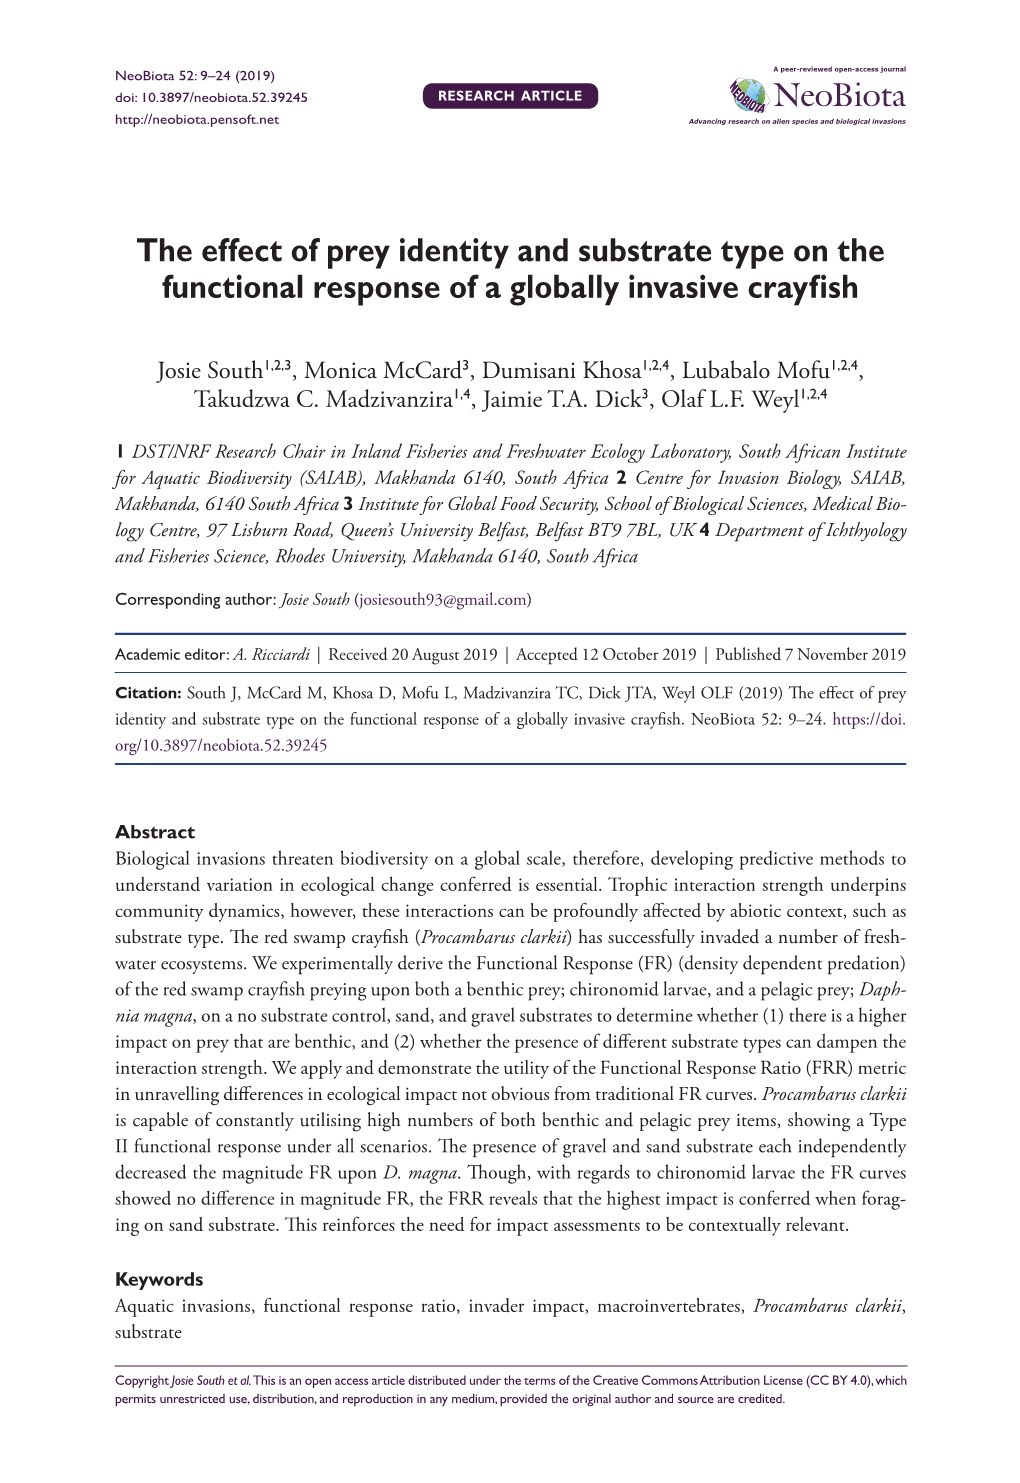 ﻿The Effect of Prey Identity and Substrate Type on the Functional